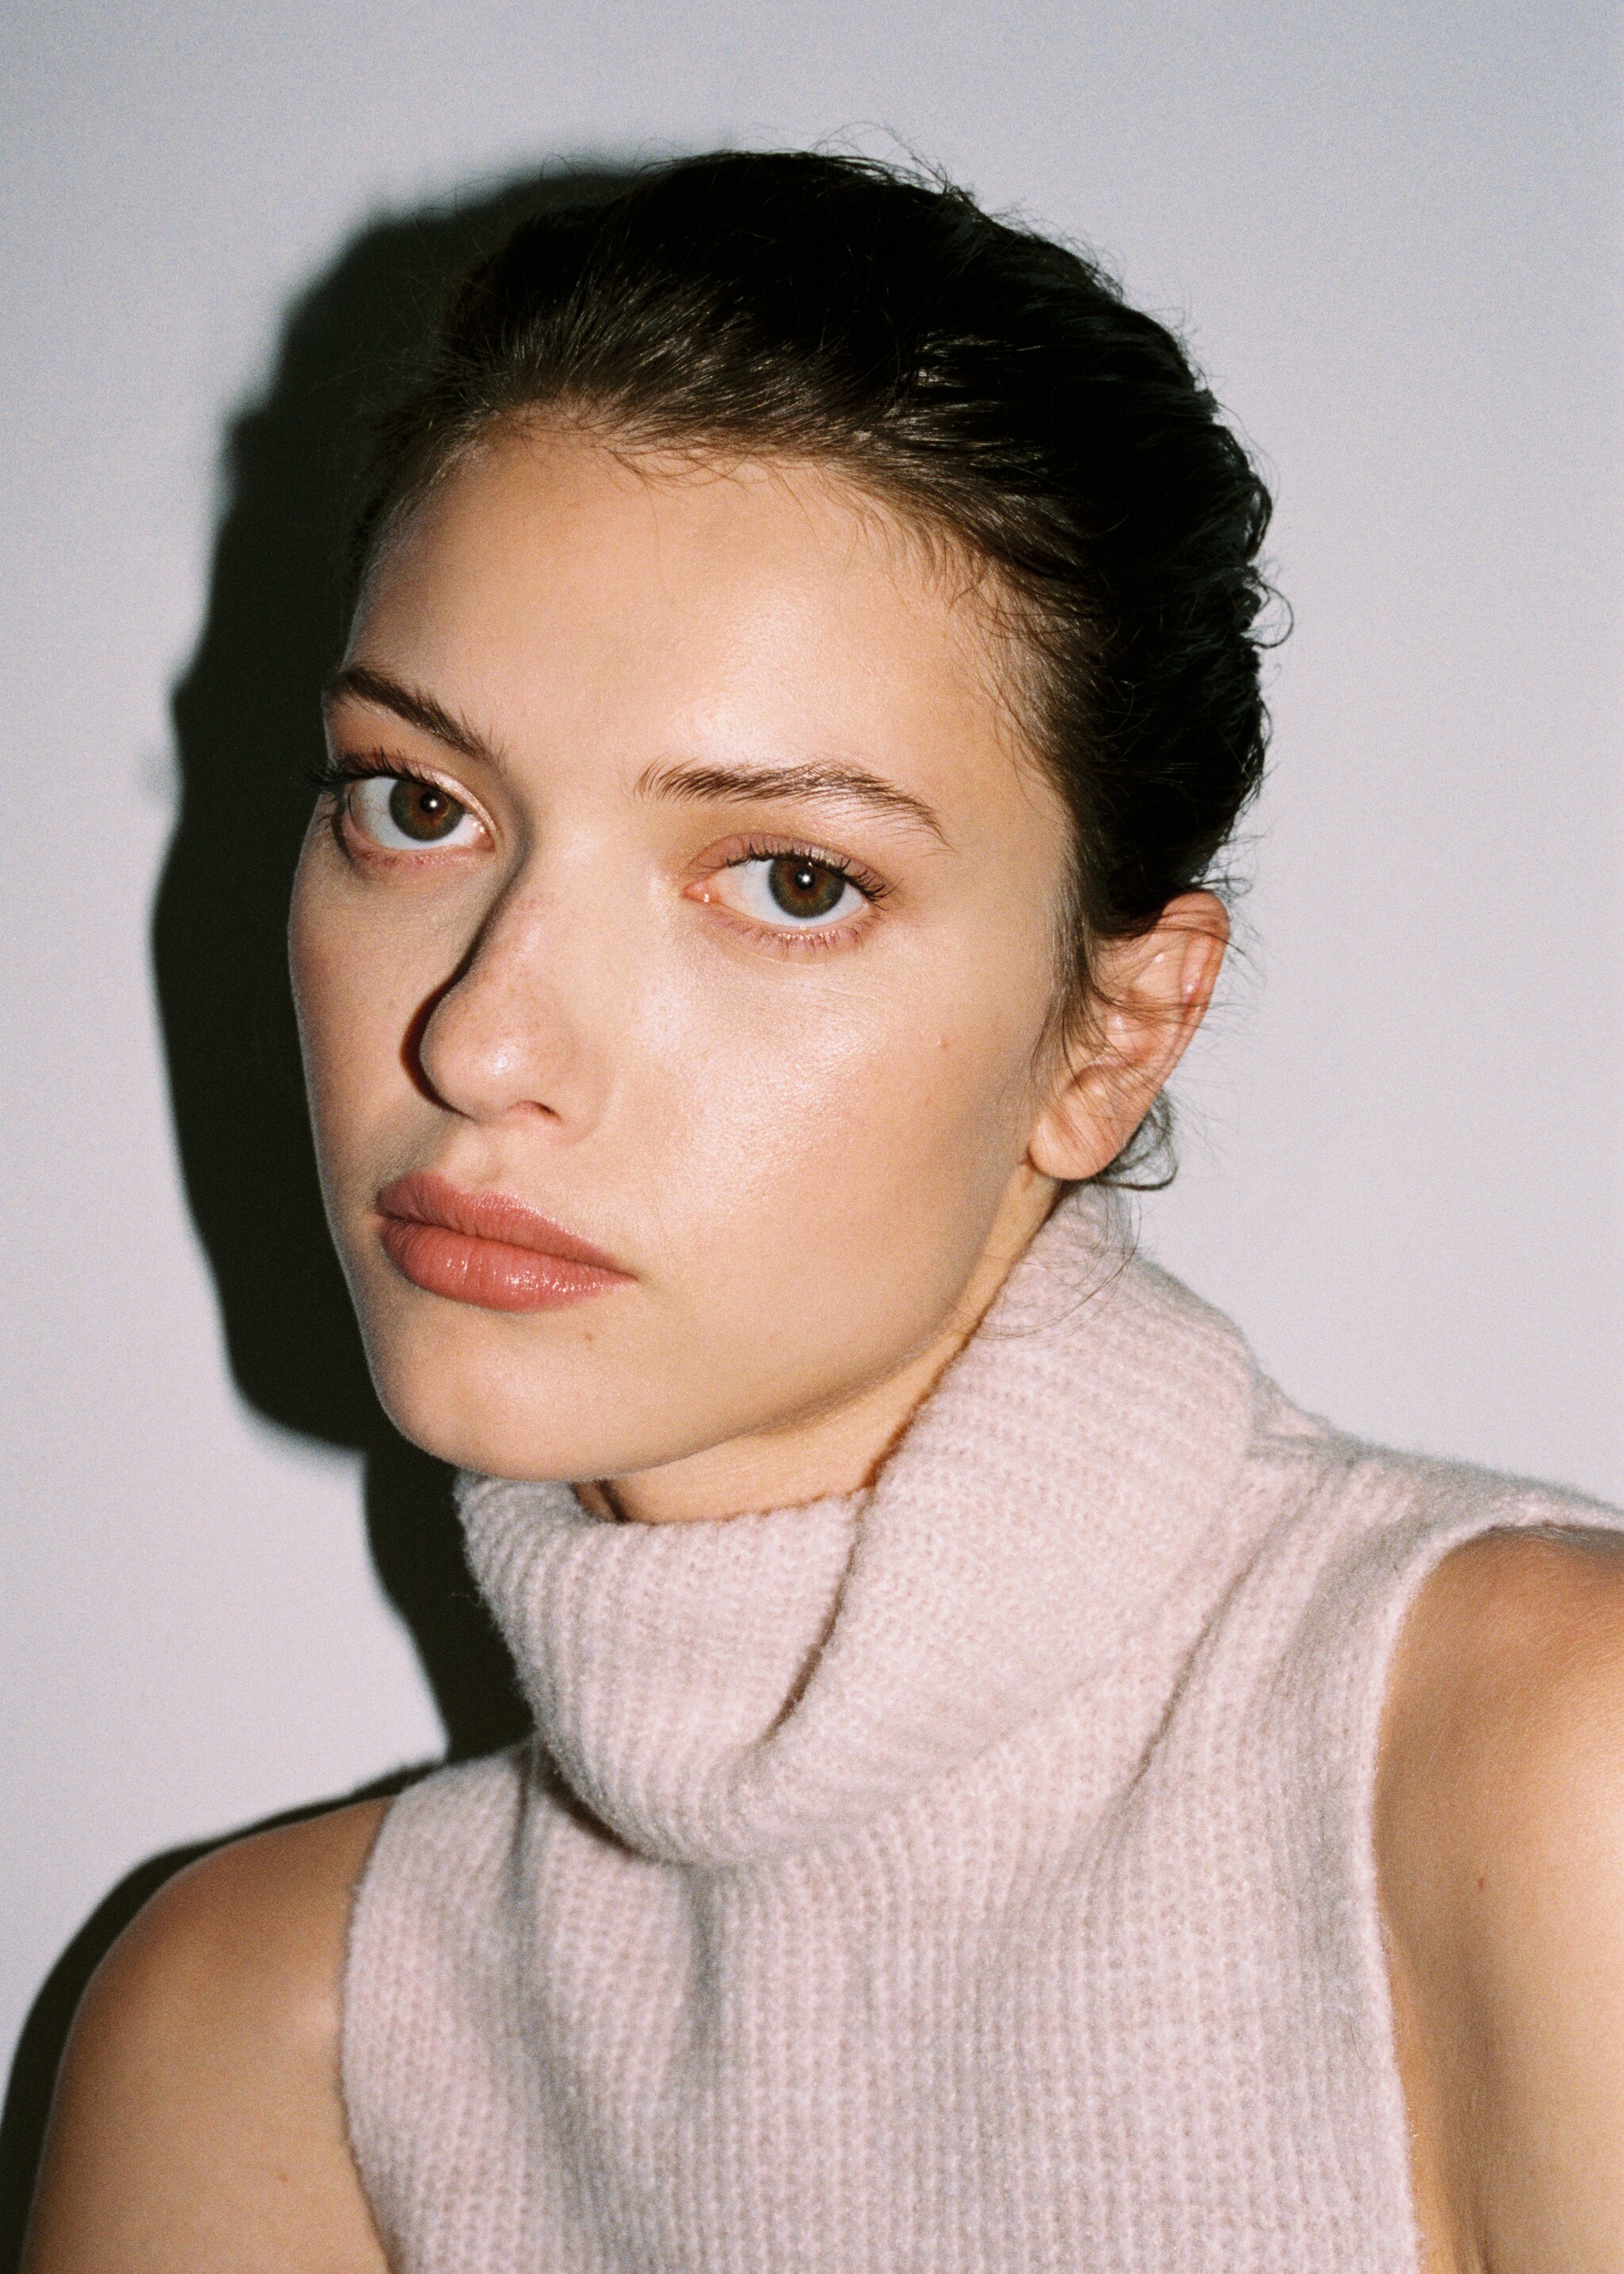 Turtleneck knit top - Details of the article 6